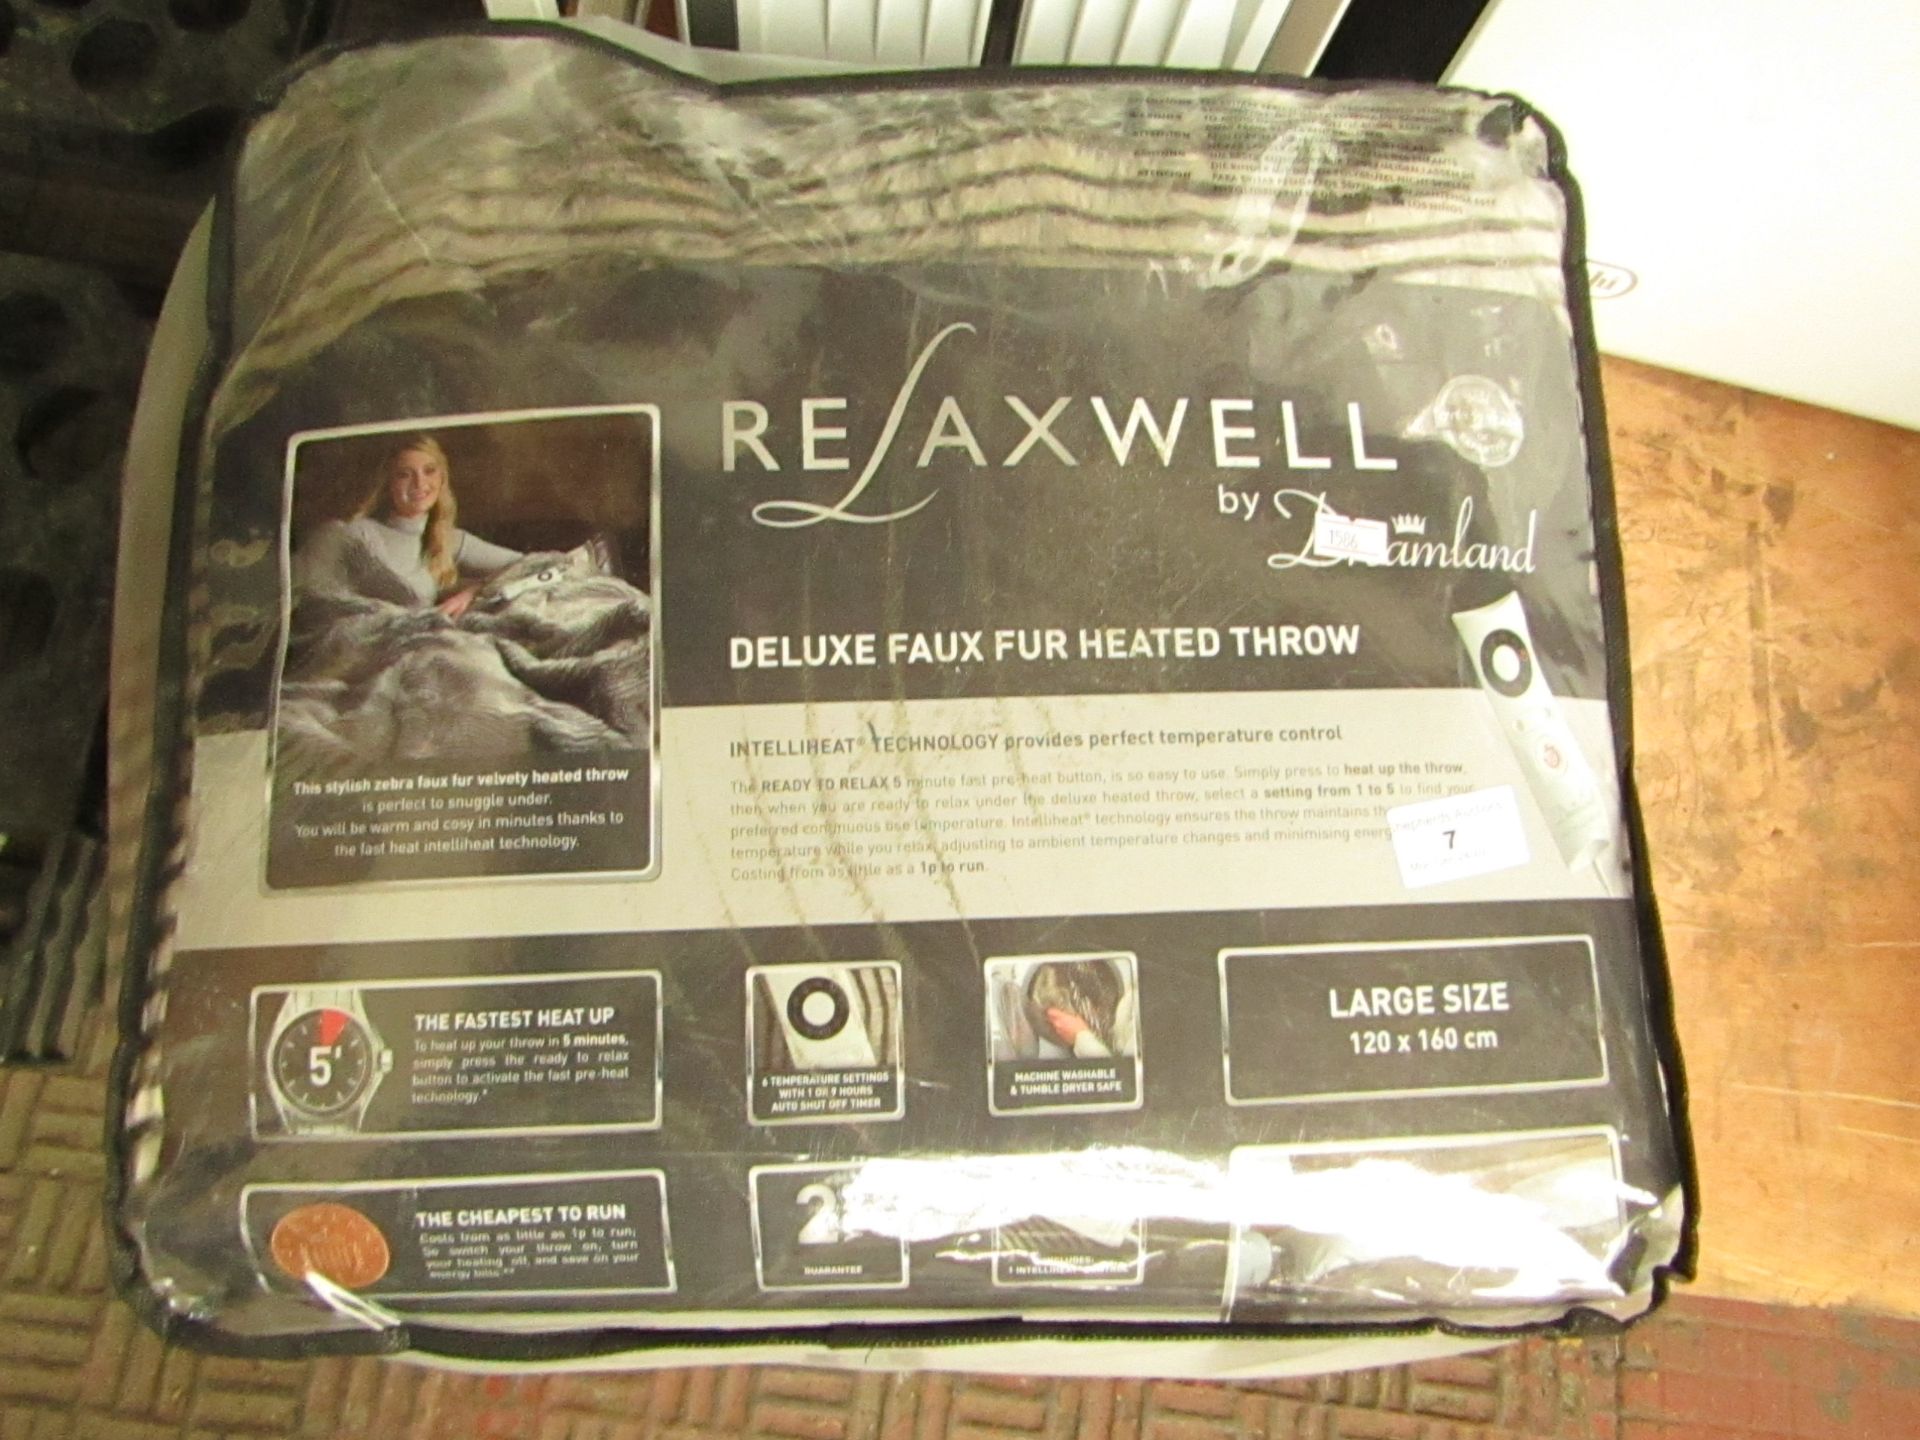 Dreamland Relaxwell Deluxe Faux Fur Heated Blanket. 120cm x 160cm. Tested workong & Looks Unused